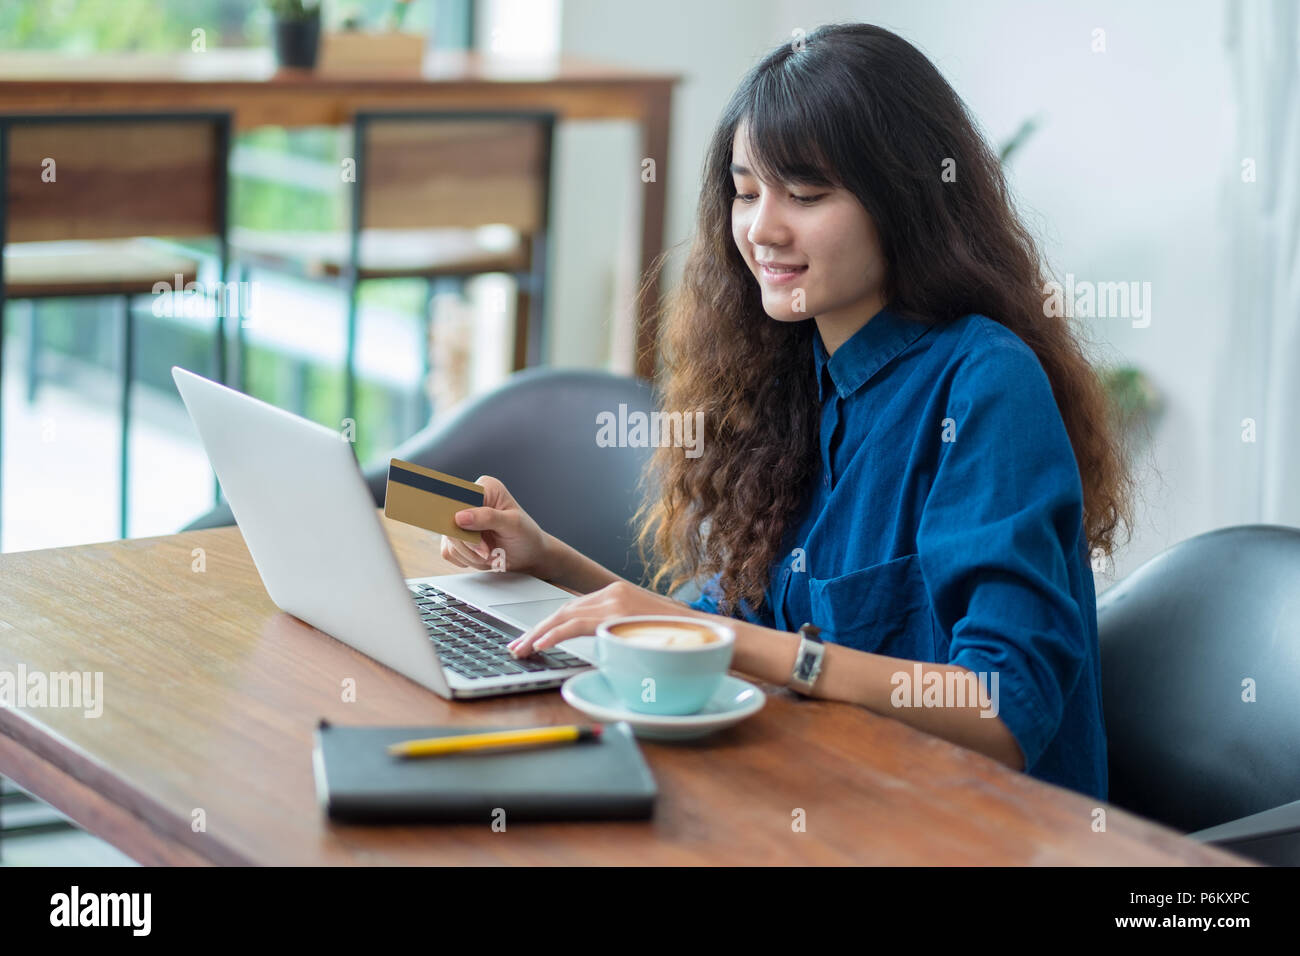 asian woman online shopping using credit card with laptop computer on wood table at cafe restaurant,Digital lifestyle concept.internet banking payment Stock Photo